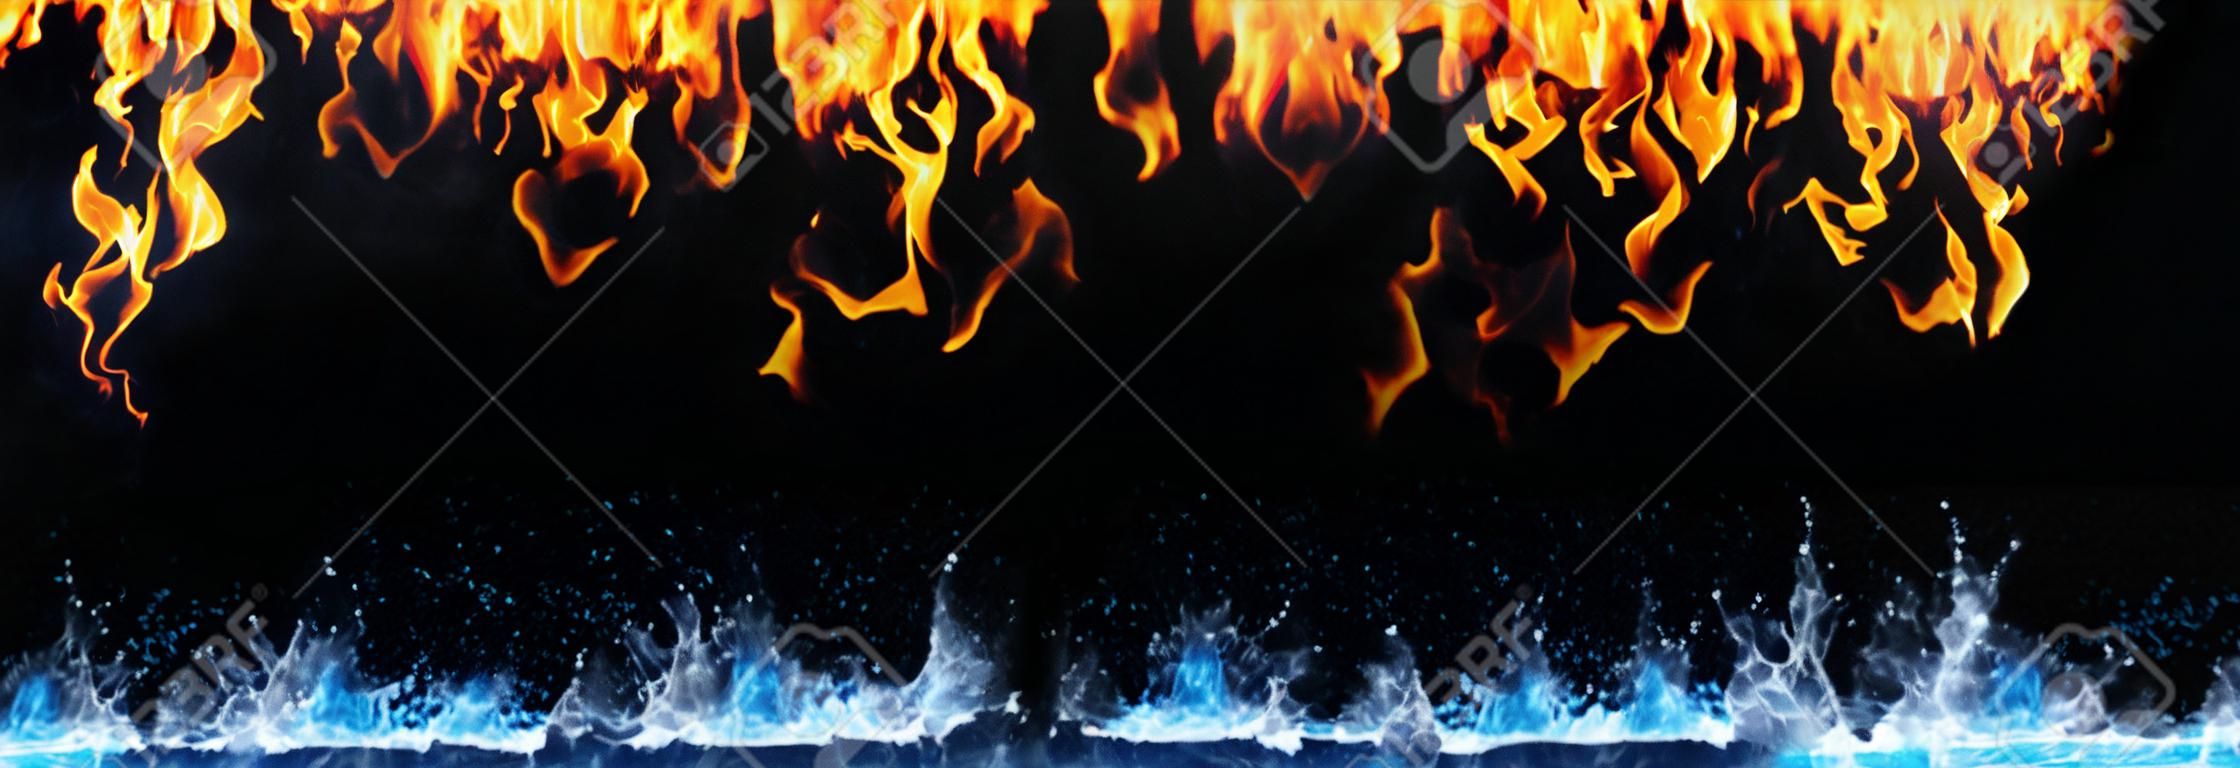 fire and water on black - opposite energy